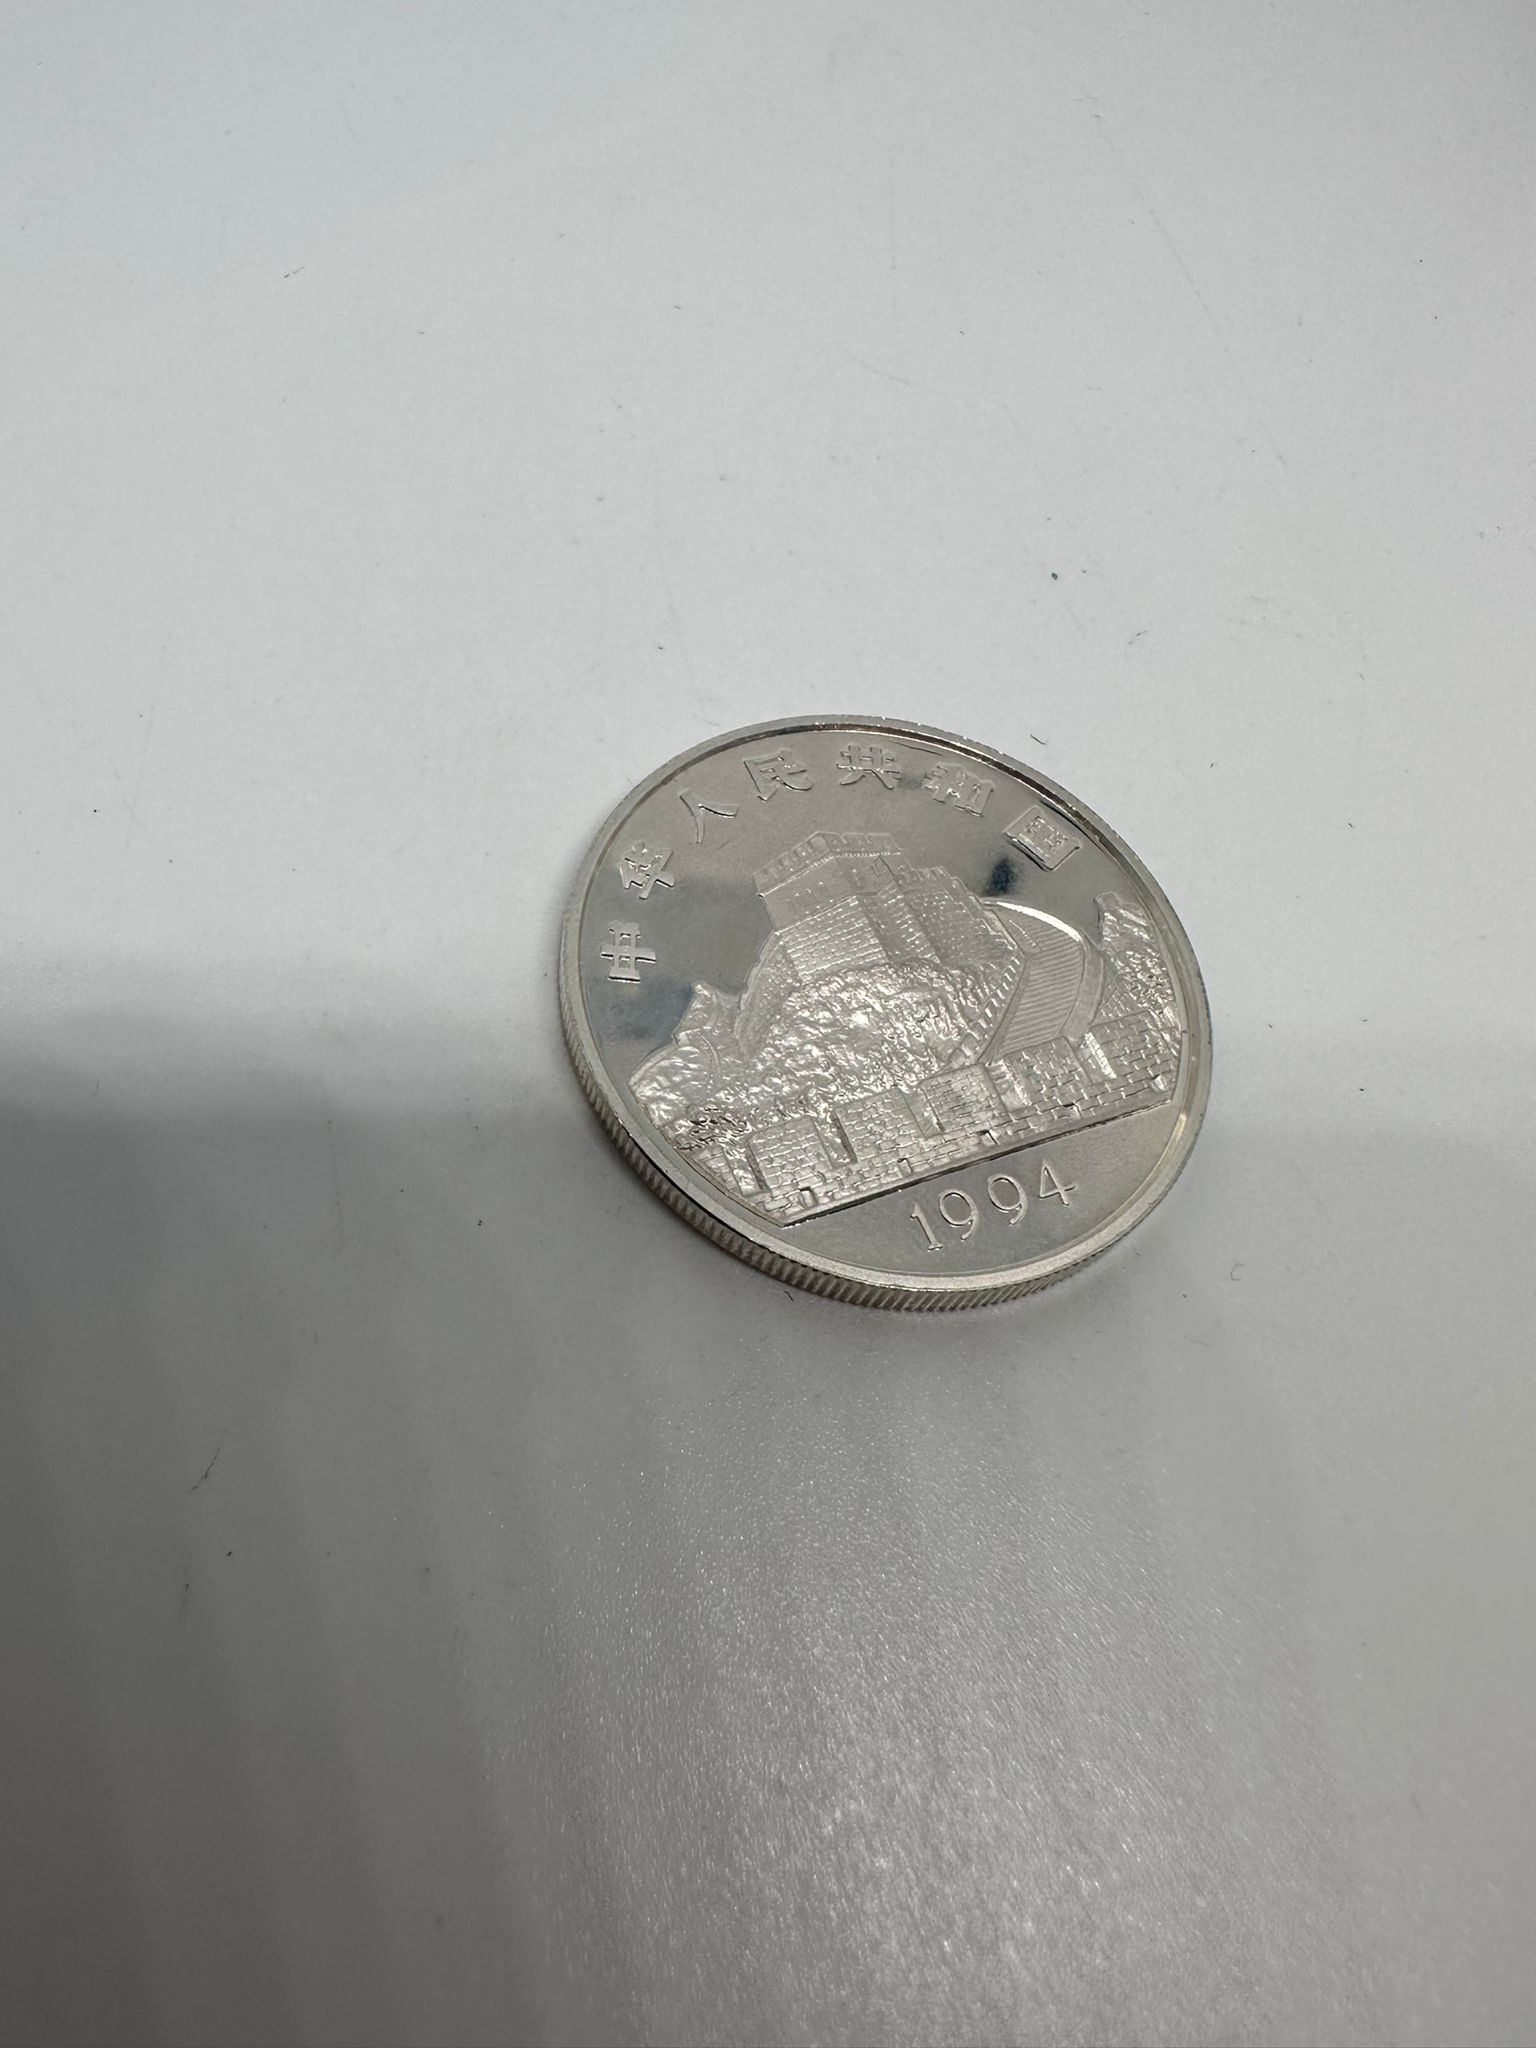 900 fine silver coin - Image 2 of 2